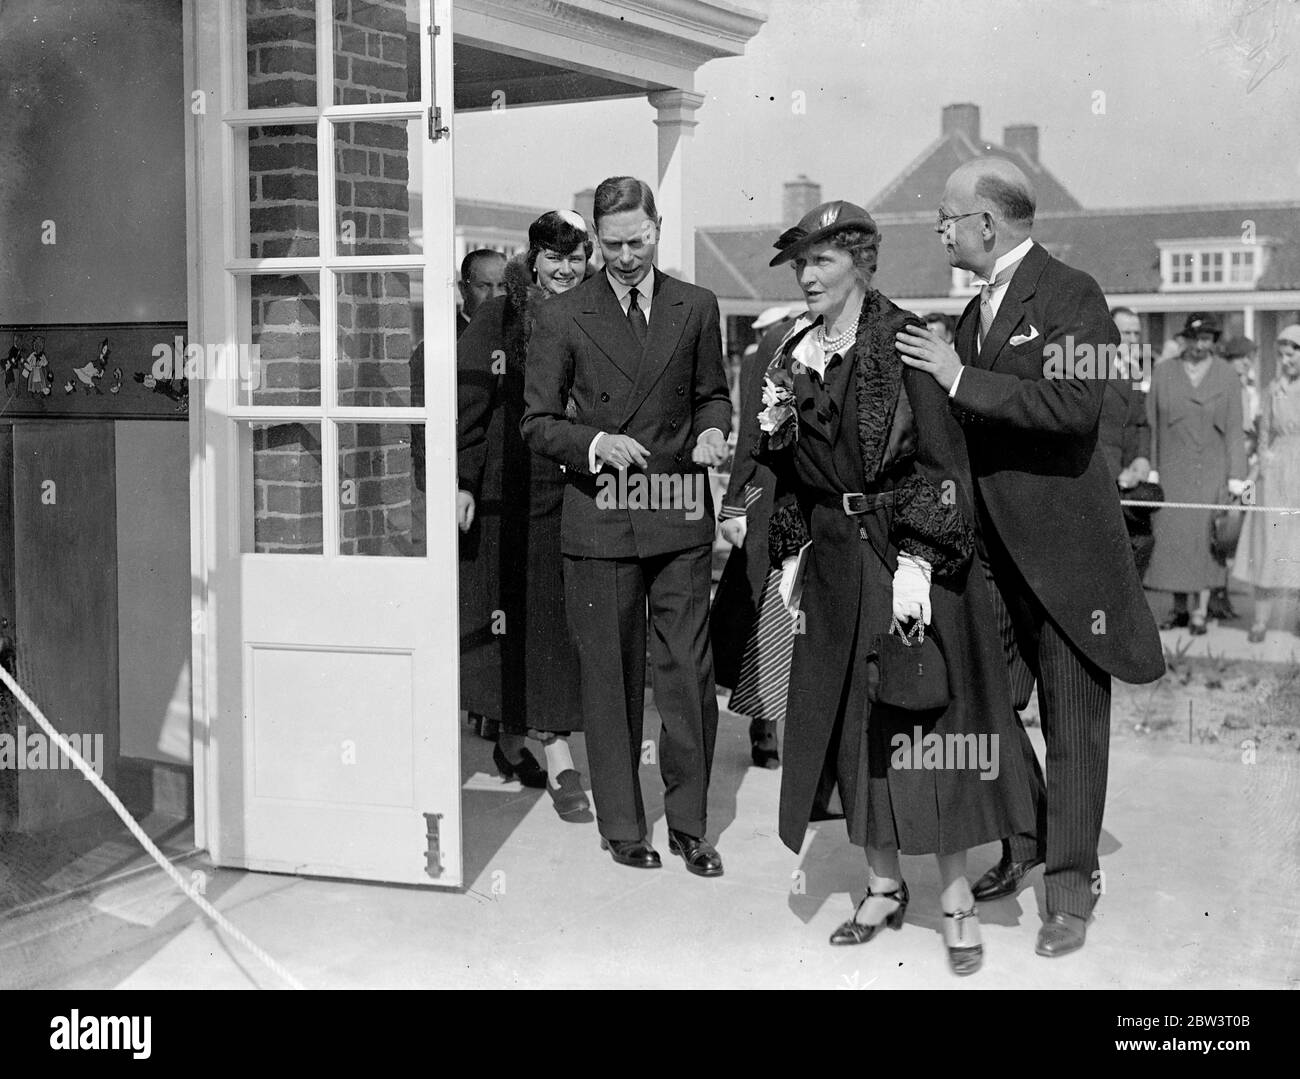 Duke of York opens Margaret McMillan house at Wrotham . Deputises for Duchess . The Duke of York , deputises for the Duchess , who is in indisposed , opened the new Margate MacMillian House , the first open air holiday house to be built for children of nursery school age , at Wrotham , Kent . The house , which is the outcome of the work of two sisters , Rachel and Margaret McMillan , for children born in the alums is built on modern nursery school lines with open air dormitories and play rooms . Forty children from the Rachel McMillan Nursery School . at Deptford are now at the centre . Photo Stock Photo